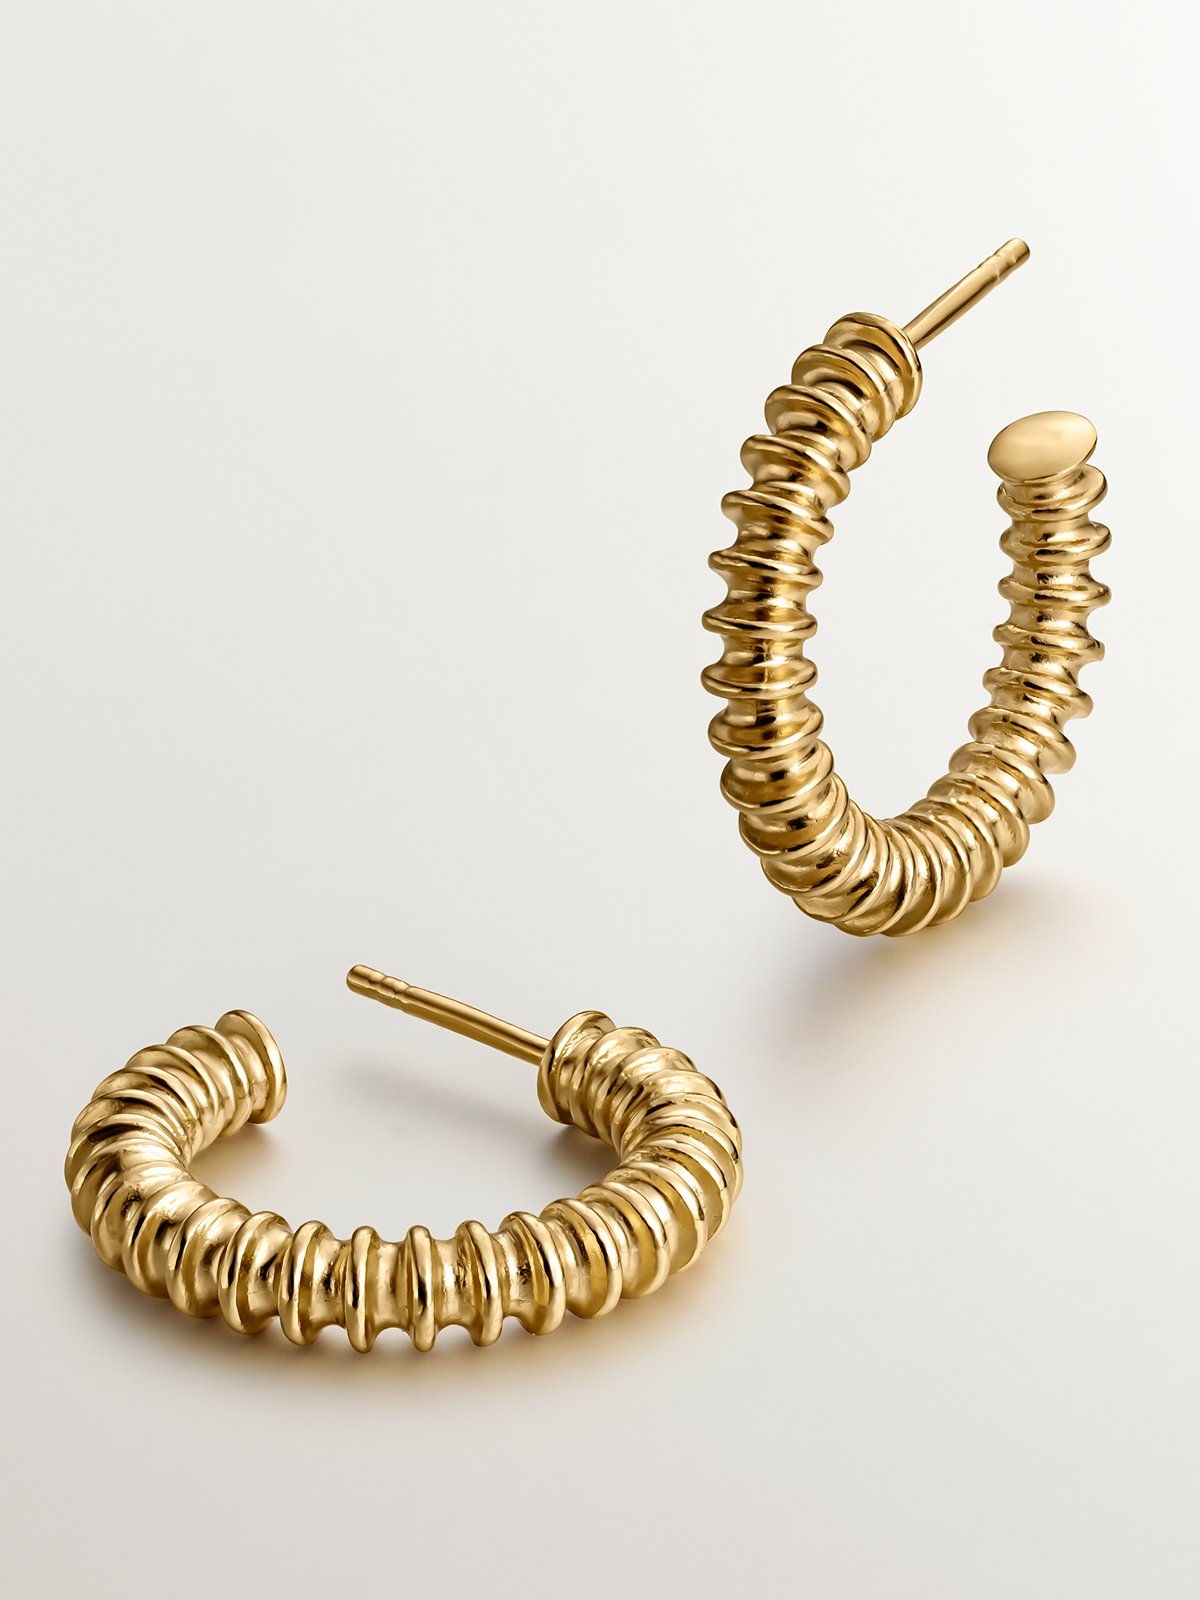 Medium hoop earrings made of 925 silver, coated in 18K yellow gold with a textured finish.